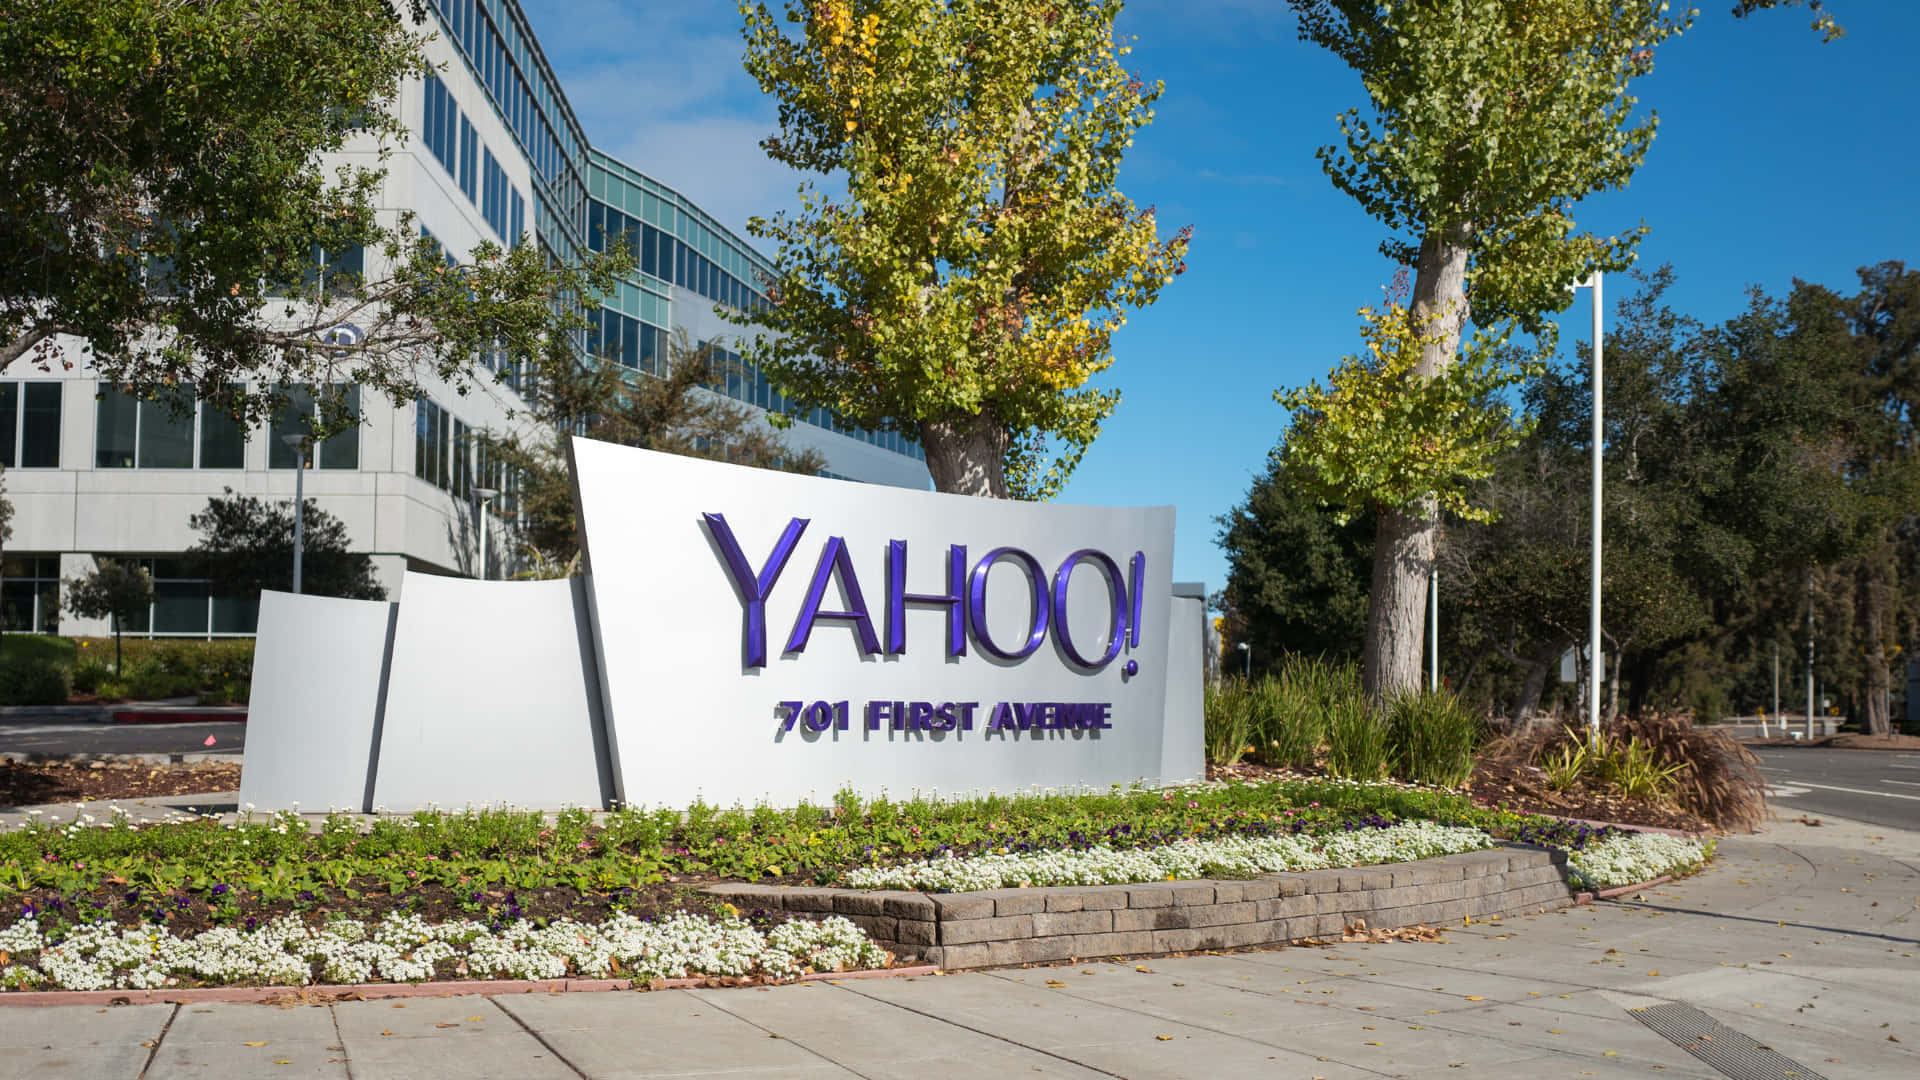 Look to Yahoo for all the Latest News and Information